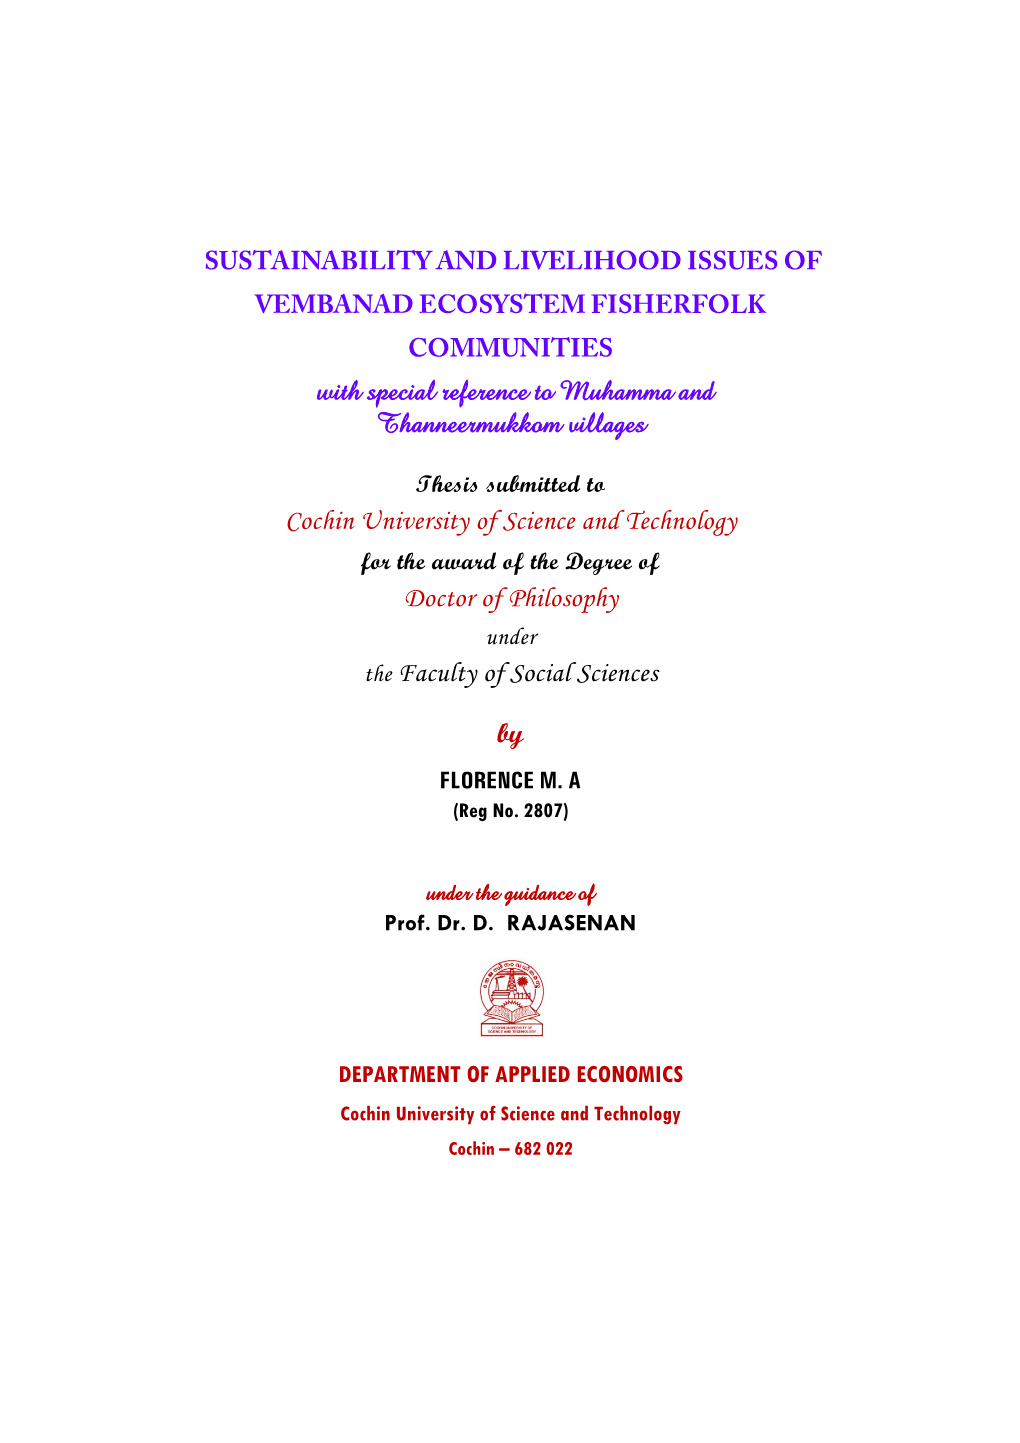 SUSTAINABILITY and LIVELIHOOD ISSUES of VEMBANAD ECOSYSTEM FISHERFOLK COMMUNITIES with Special Reference to Muhamma and Thanneermukkom Villages